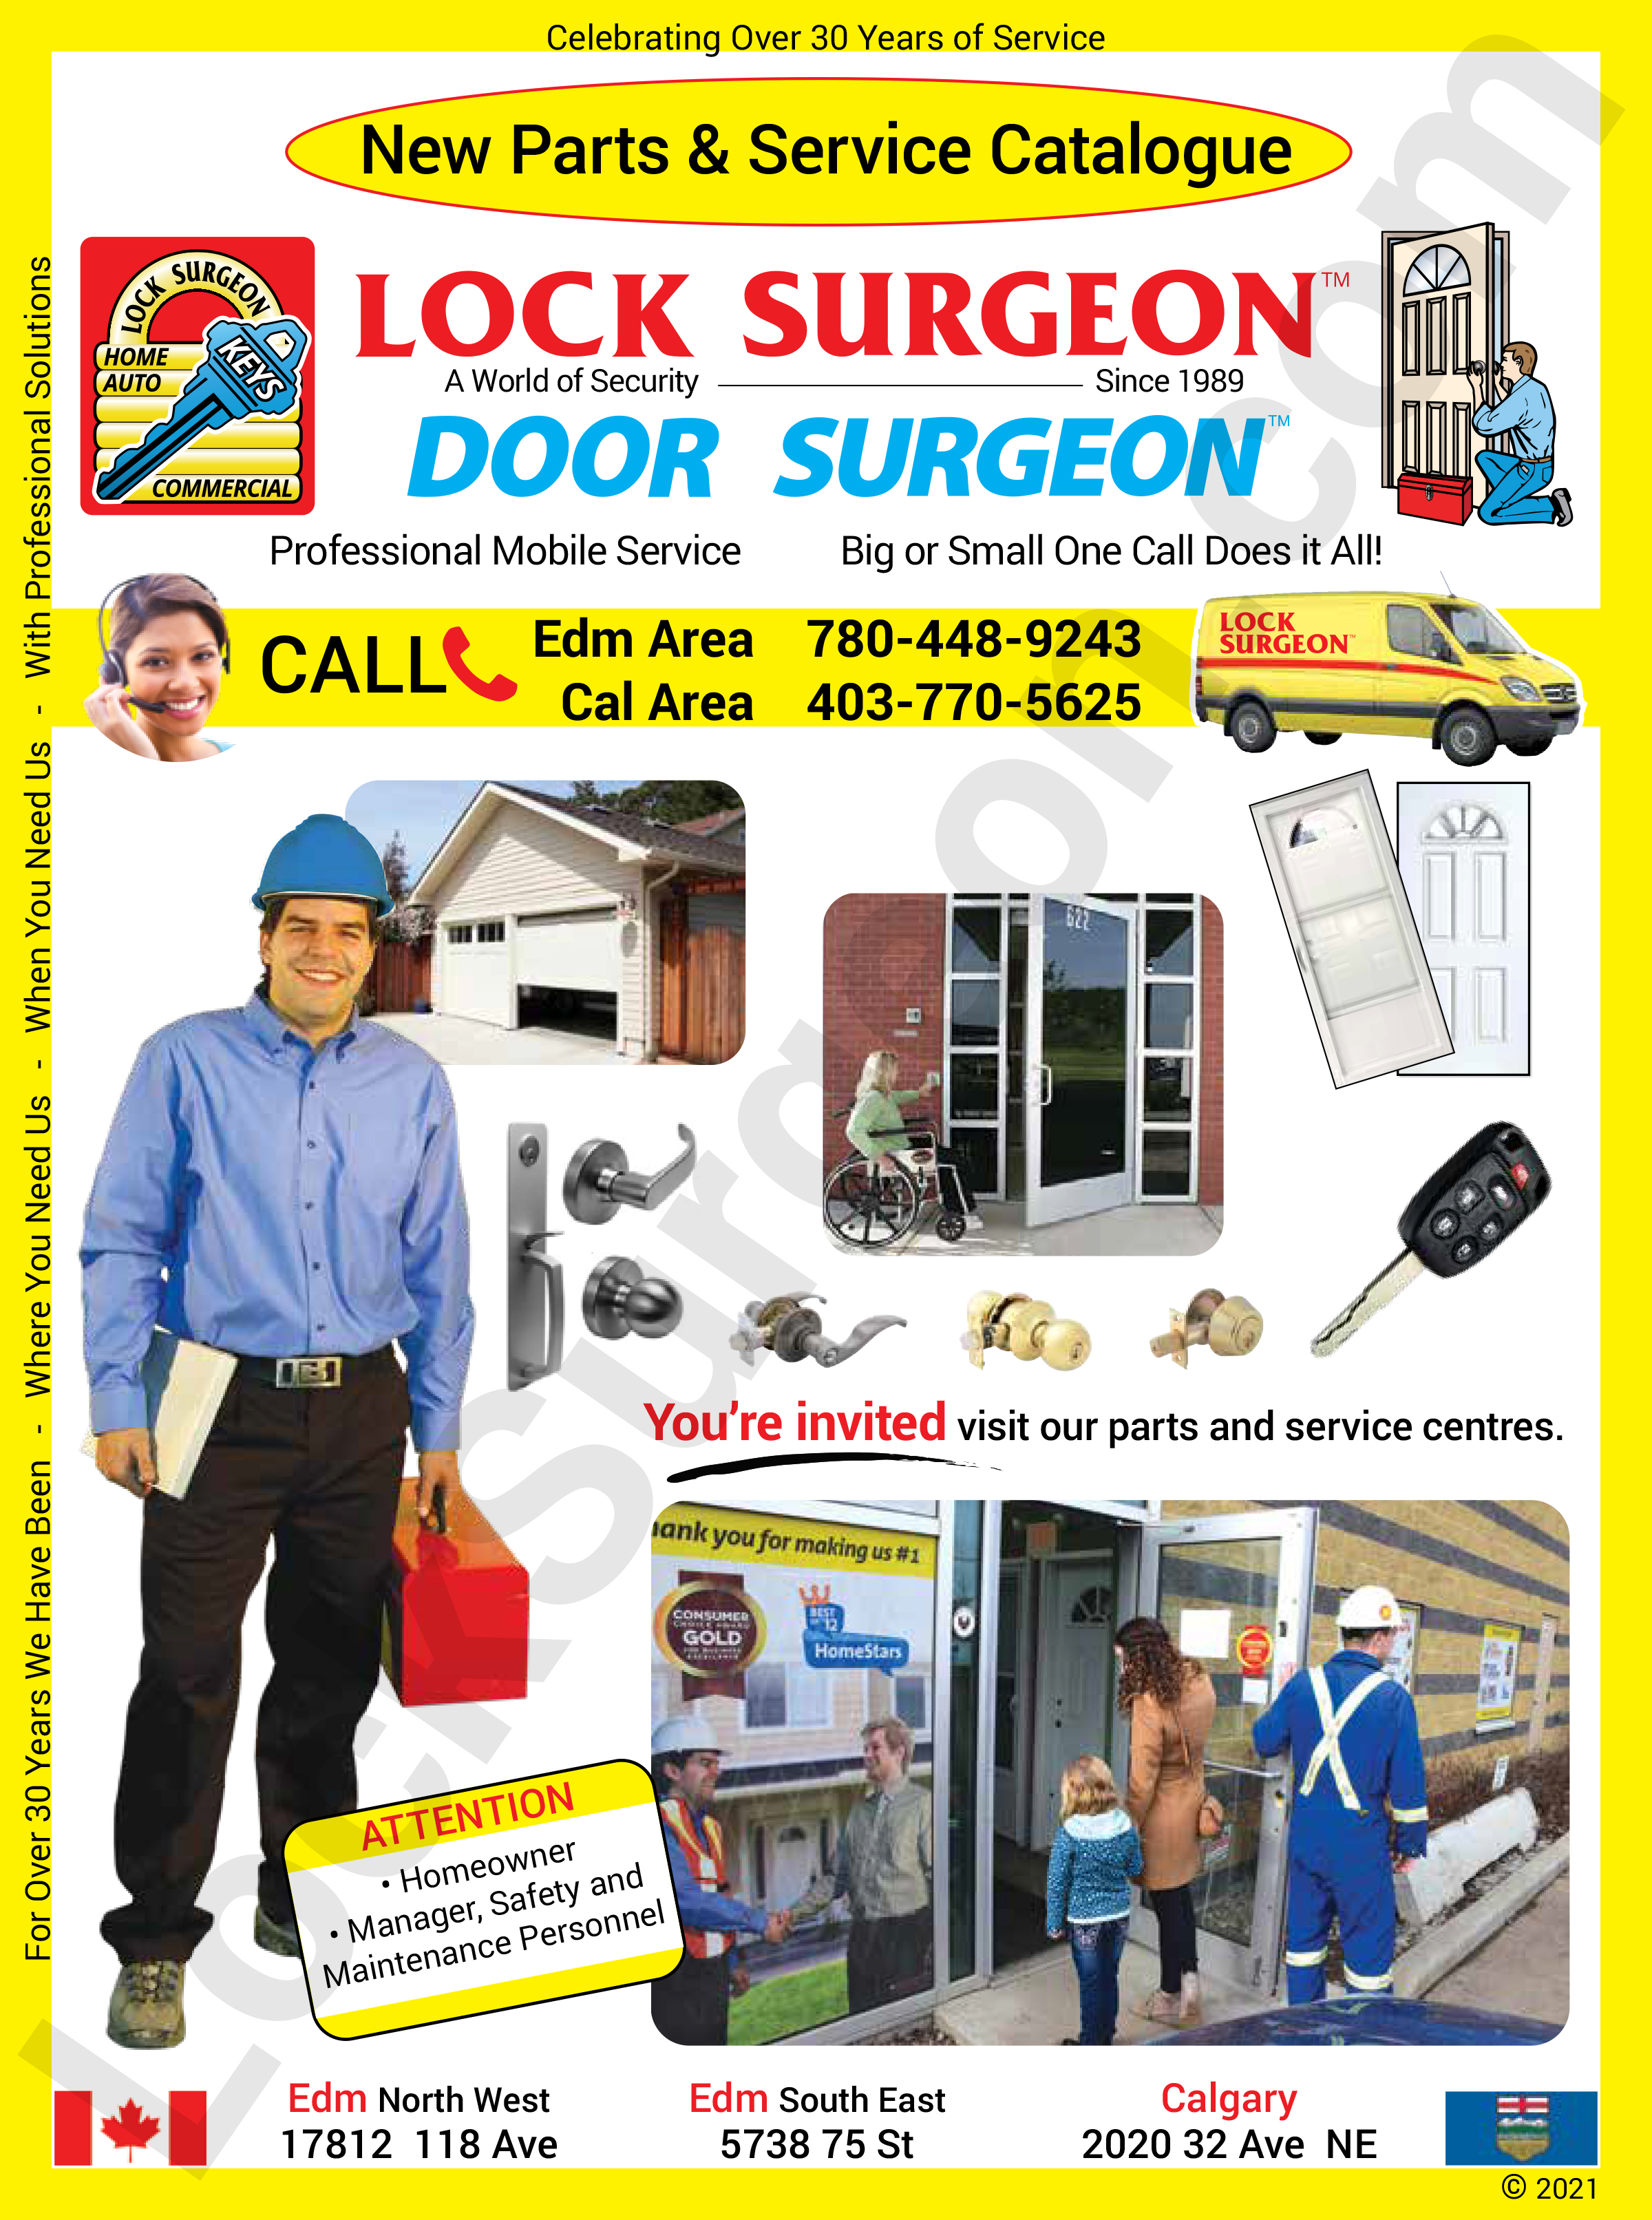 Home lock and door repair, Business Locks and Security Hardware, Commercial Key Systems, Security Keys, Padlock and Key, Home of the Giant Padlock, Door and Hardware Installation and repair, 3 Service Centres, Lock Surgeon, Door Surgeon, Always Mobile, Service Vans, Expert Installation